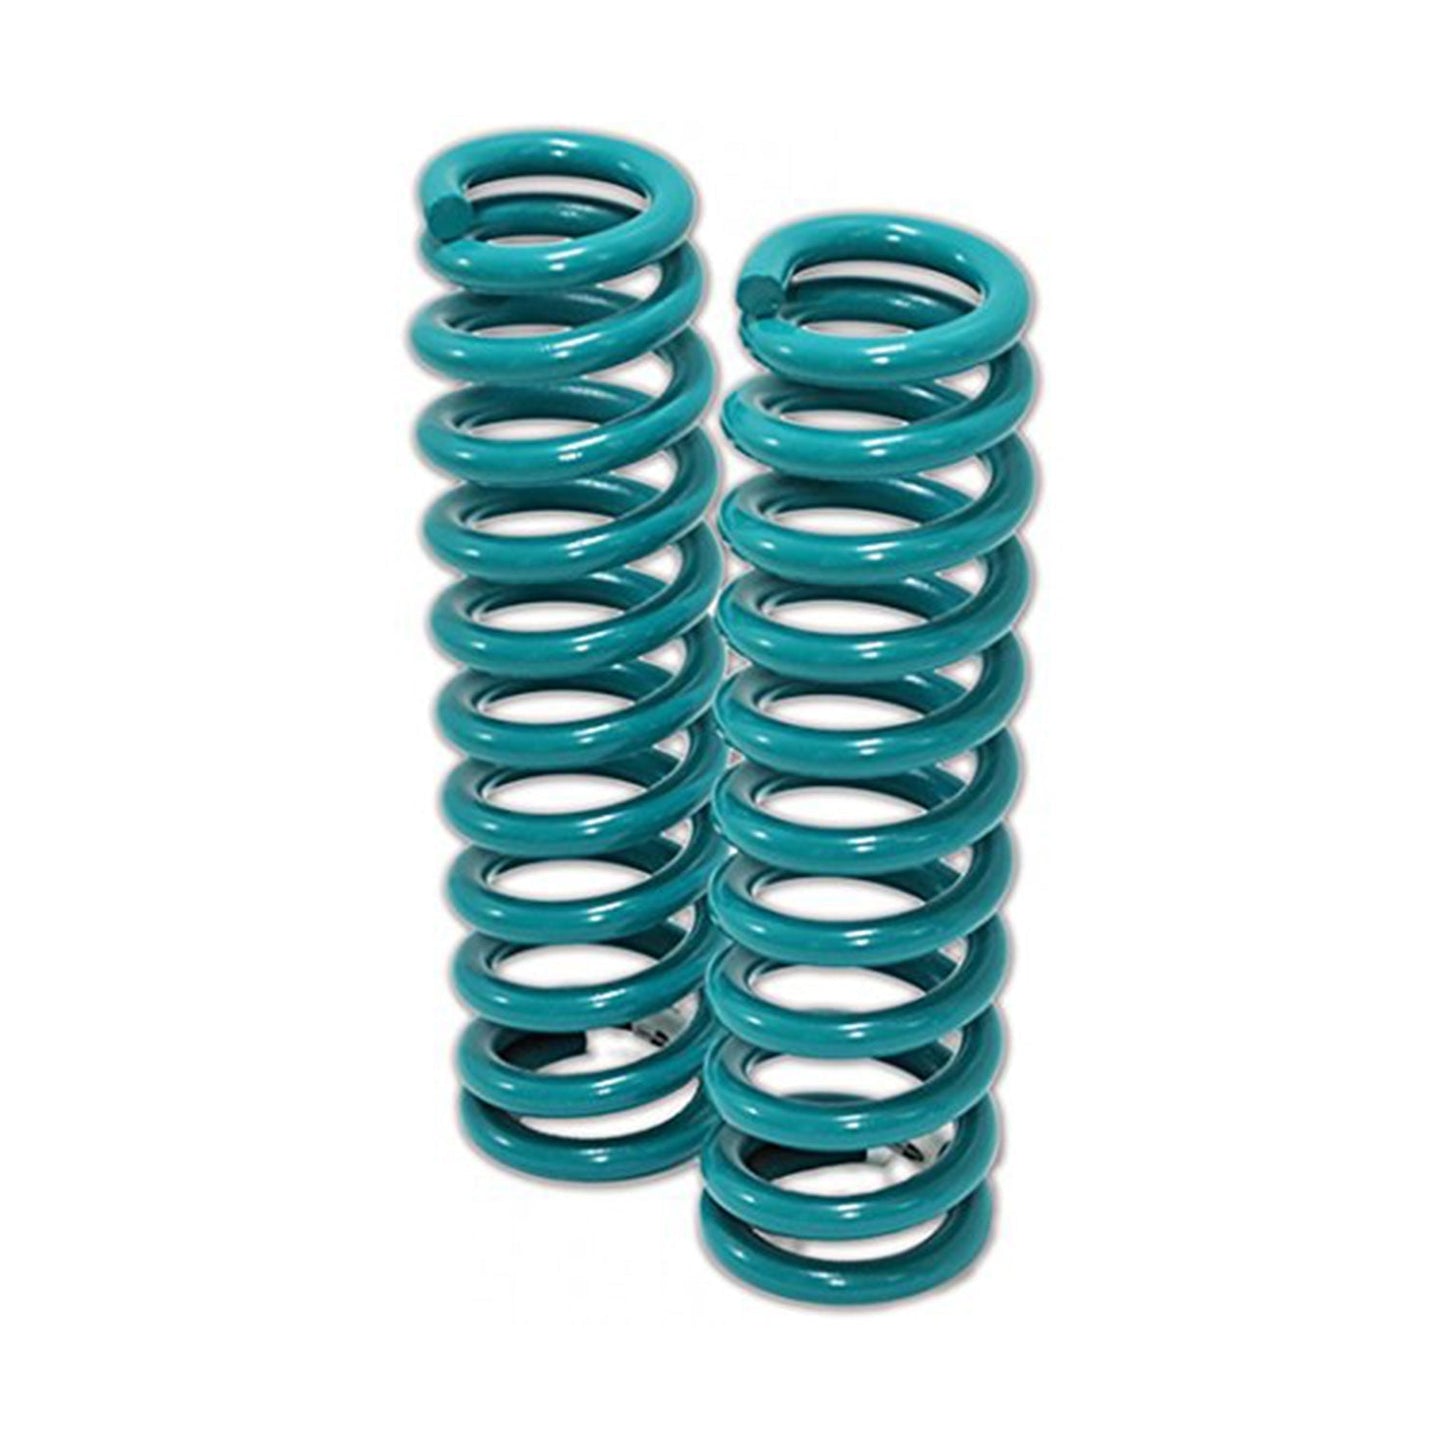 Dobinsons Front Coil Springs for Land Rover vehicles  (C51-067)